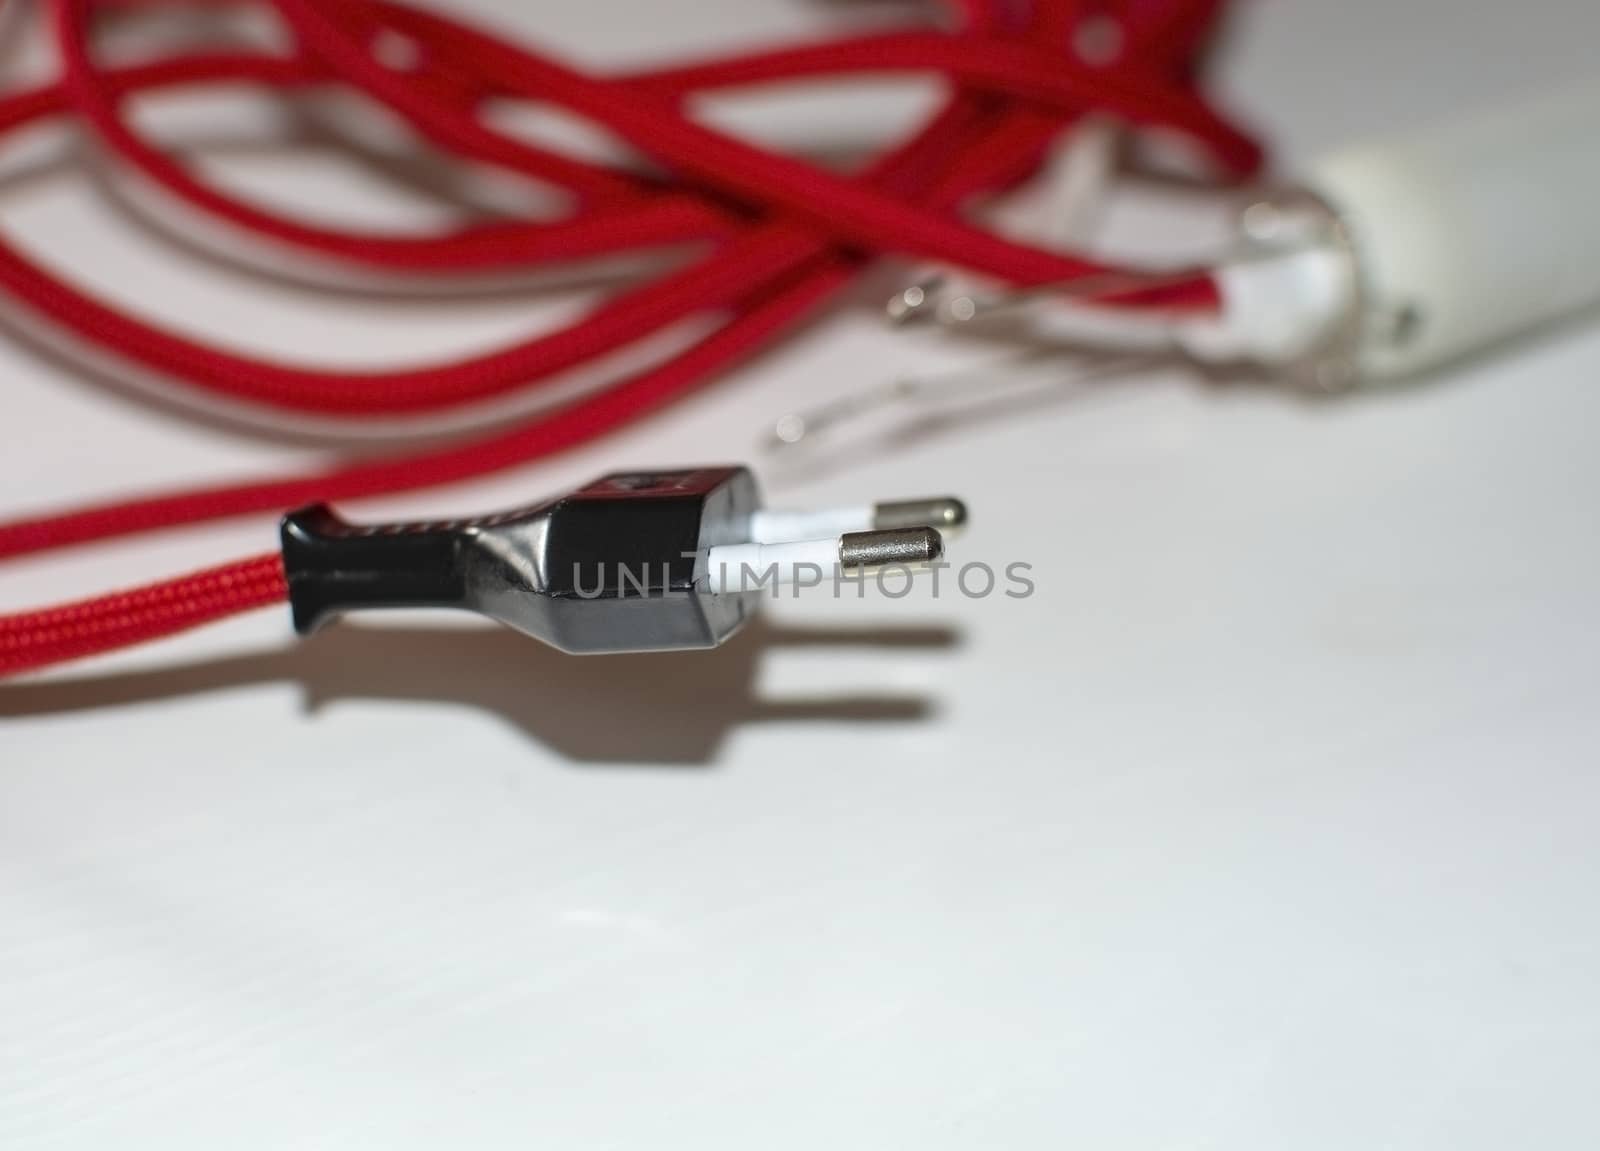 Electricity cord covered in red fabric on white background.